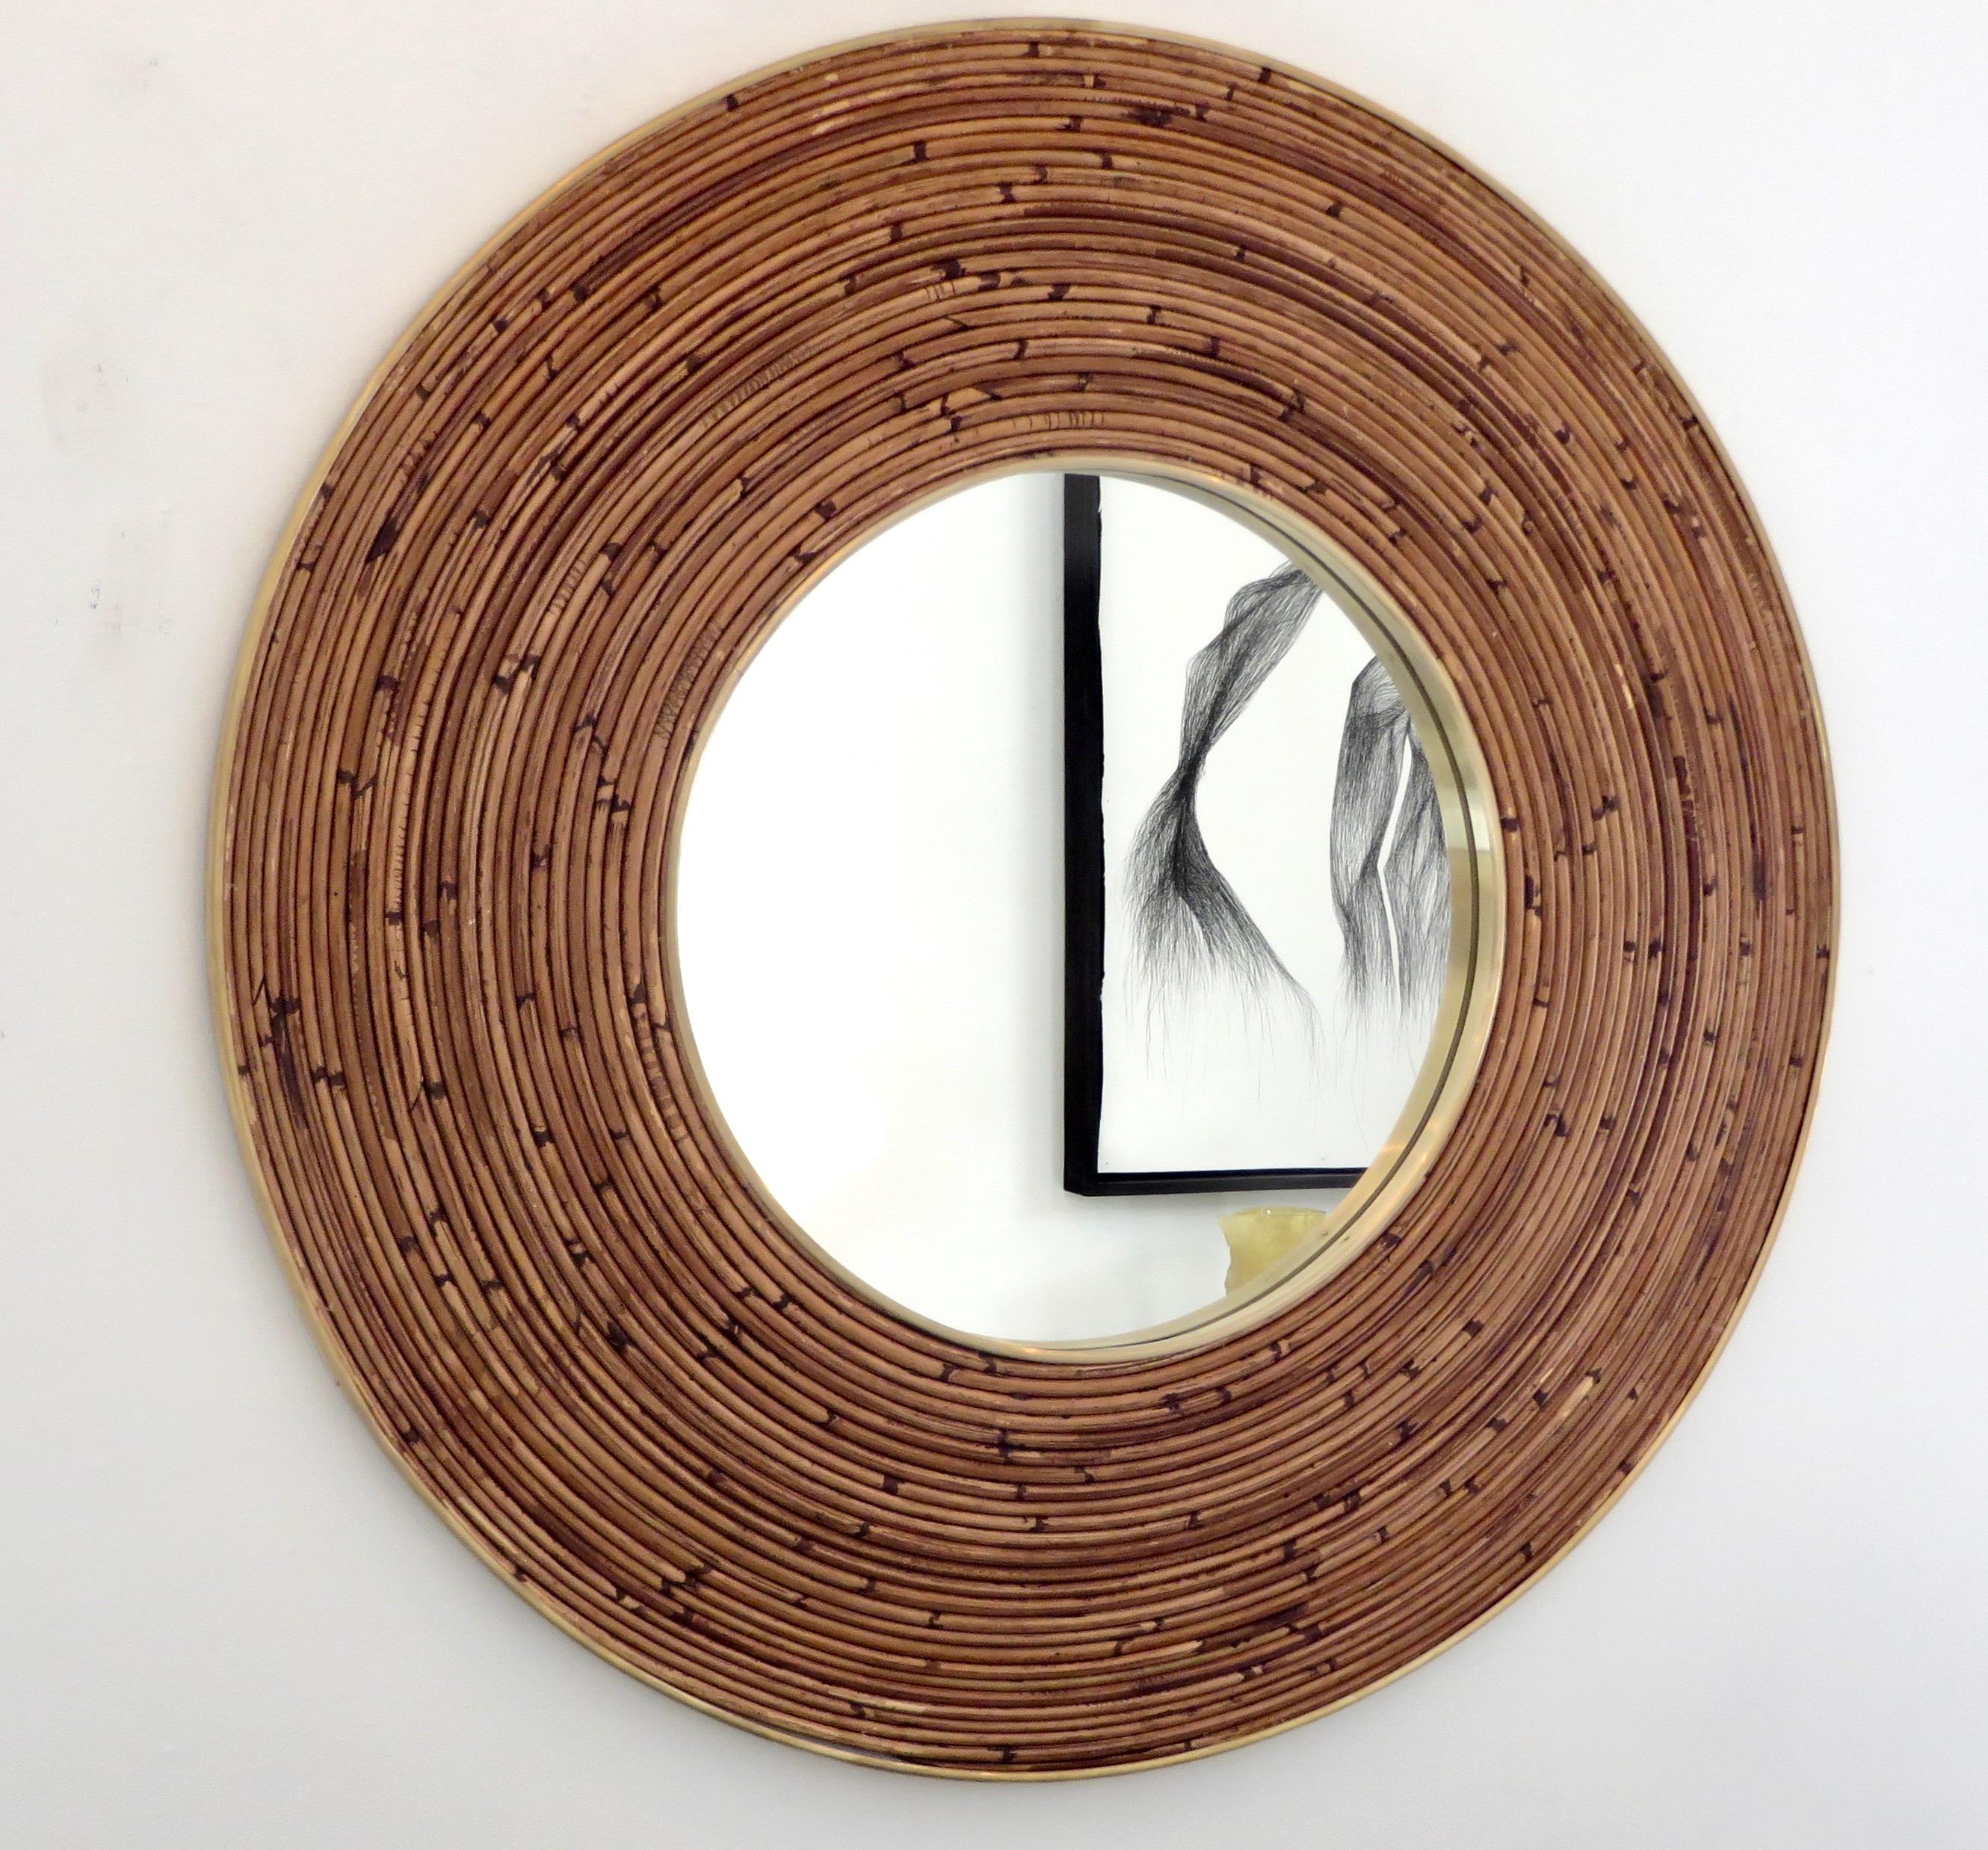 A large Italian round rattan bamboo and brass framed mirror.
There is a brass frame not only on the outside but surrounding the mirror portion itself.
Excellent condition with no breaks or losses to the rattan.
Variegated coloration is in the rattan